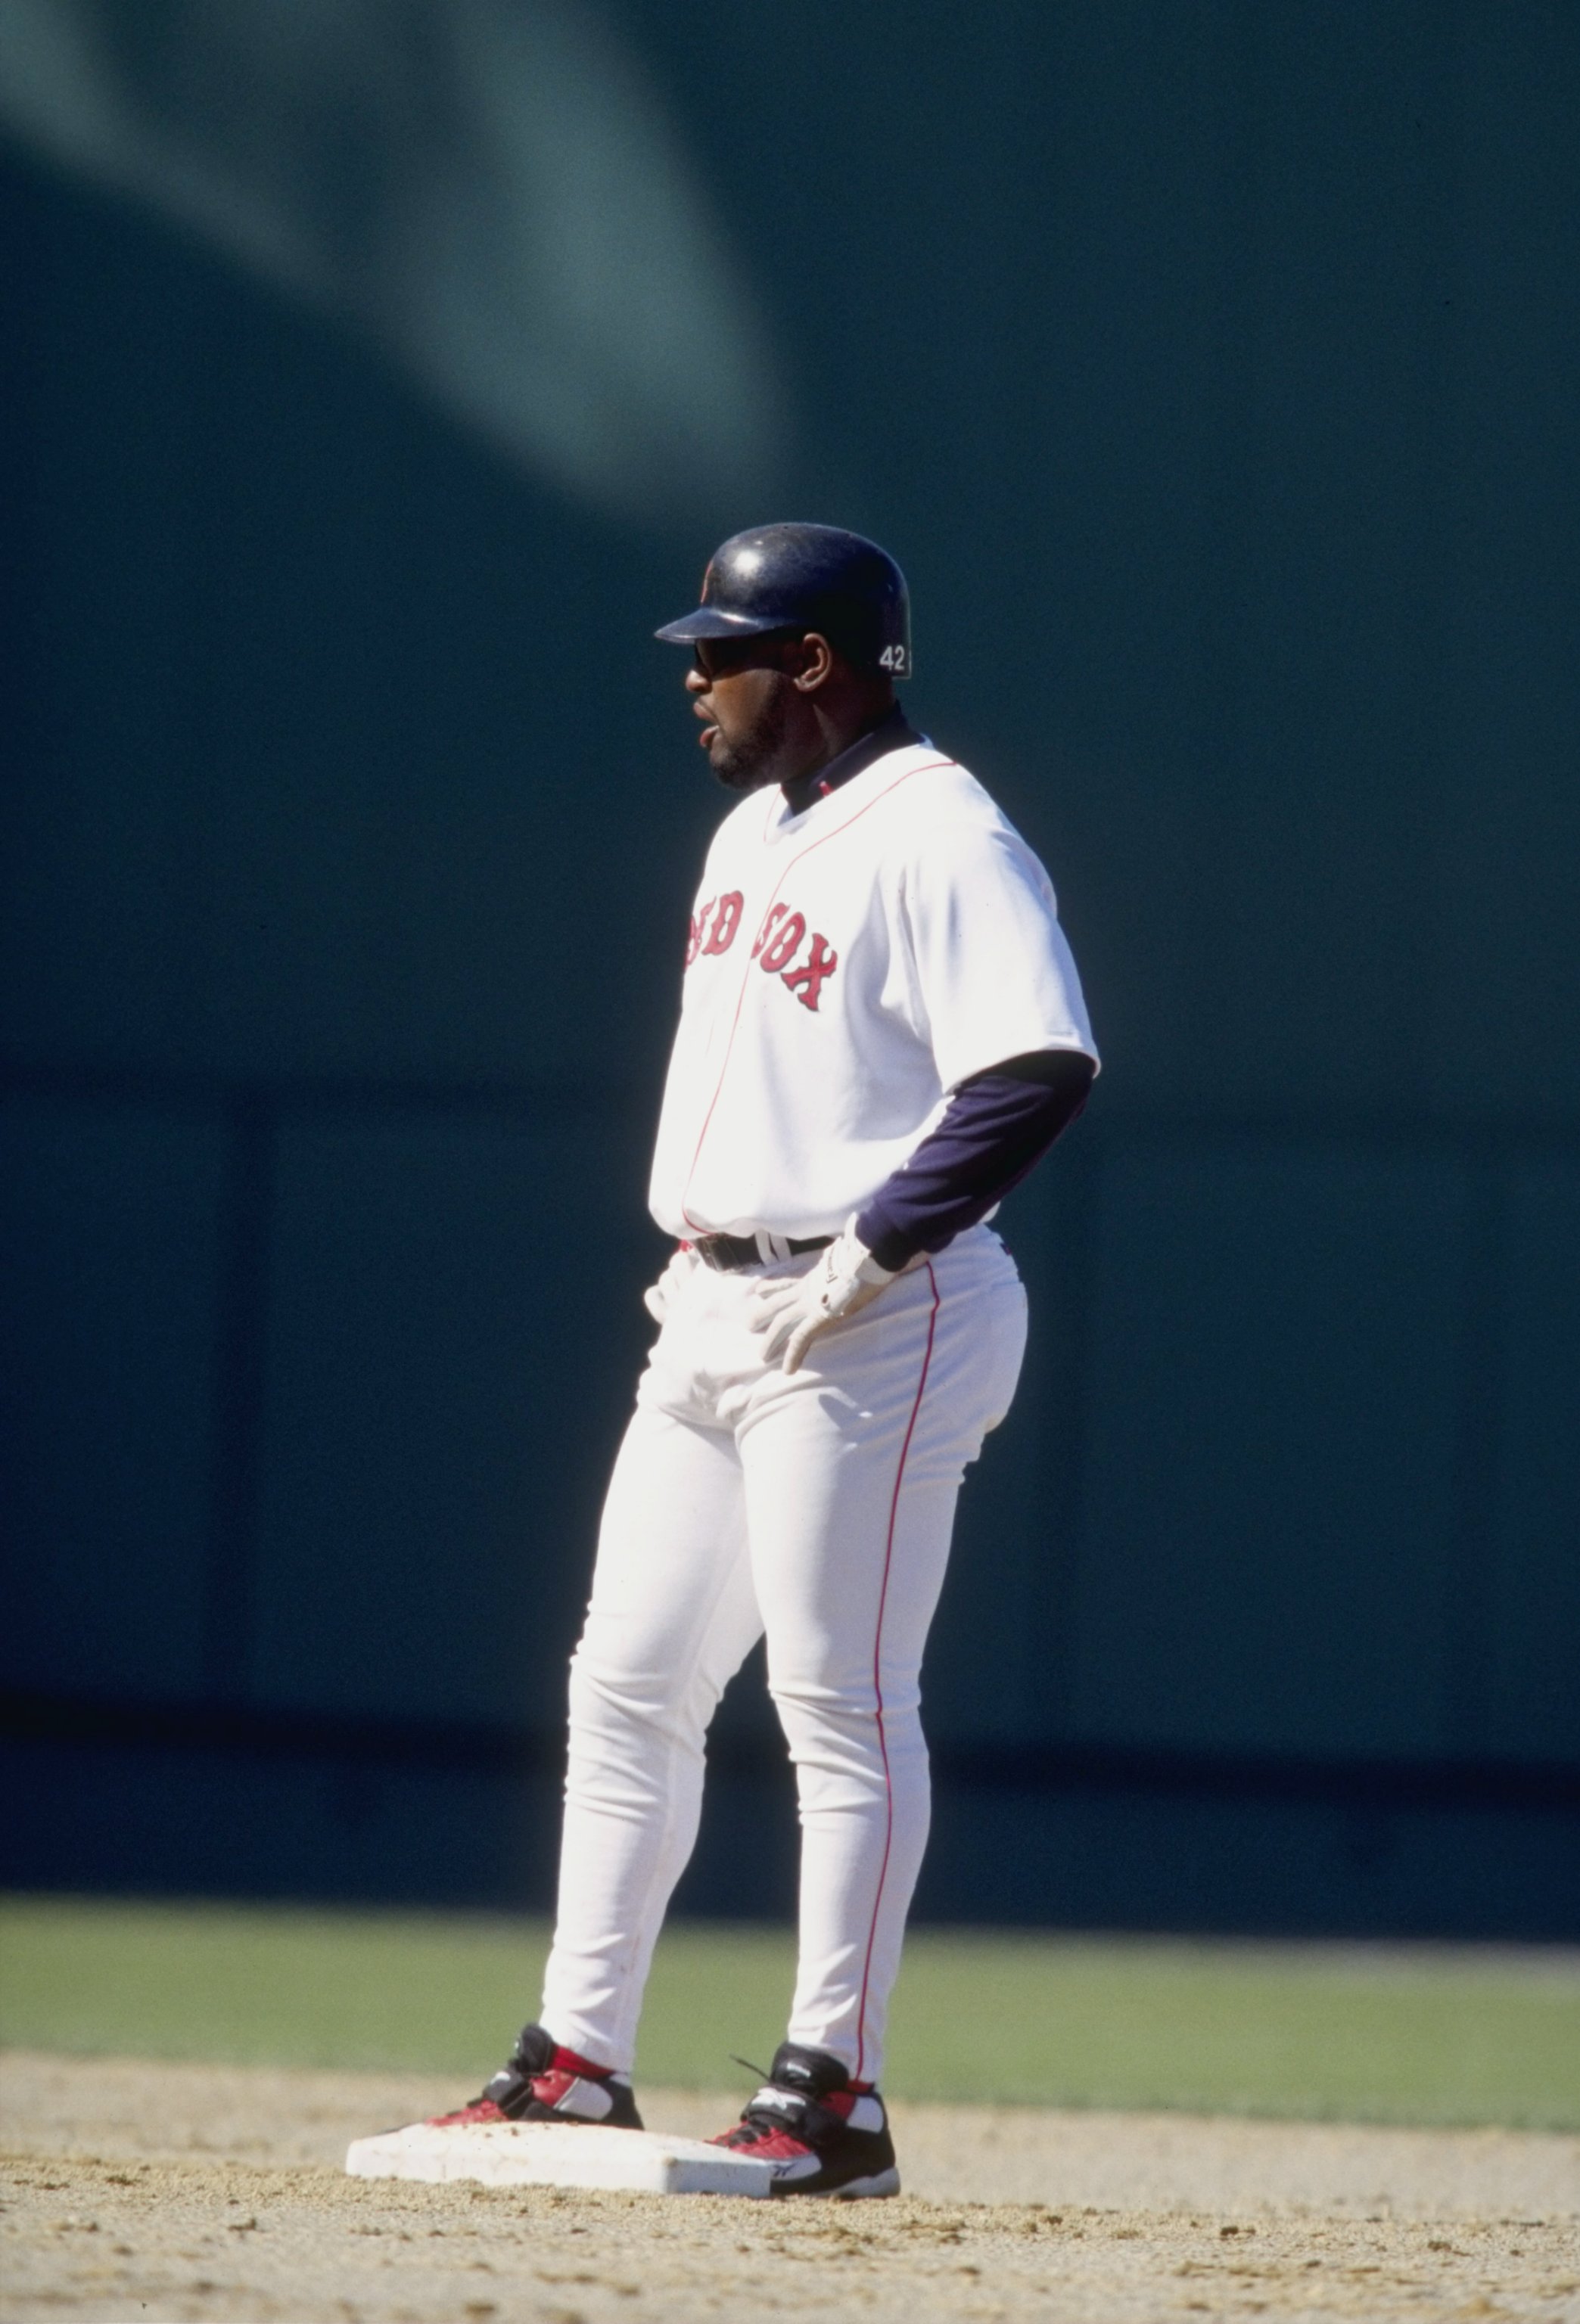 Boston Red Sox: Mo Vaughn and the 6 Most Underrated Players in